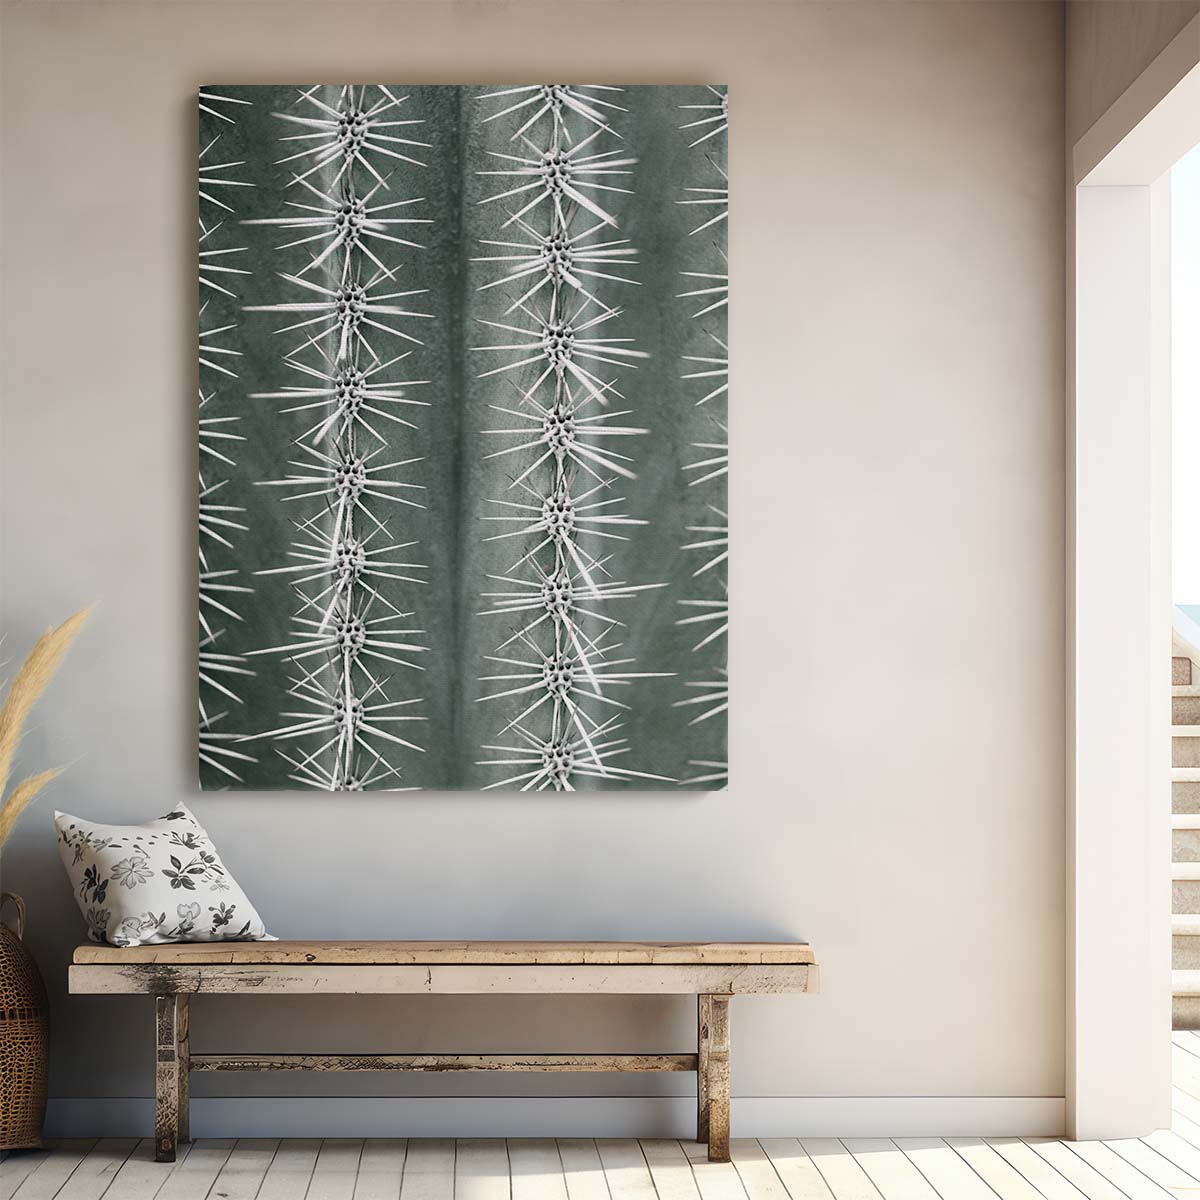 Botanical Abstract Cacti Photography - Green Thorny Plant Still Life Art by Luxuriance Designs, made in USA